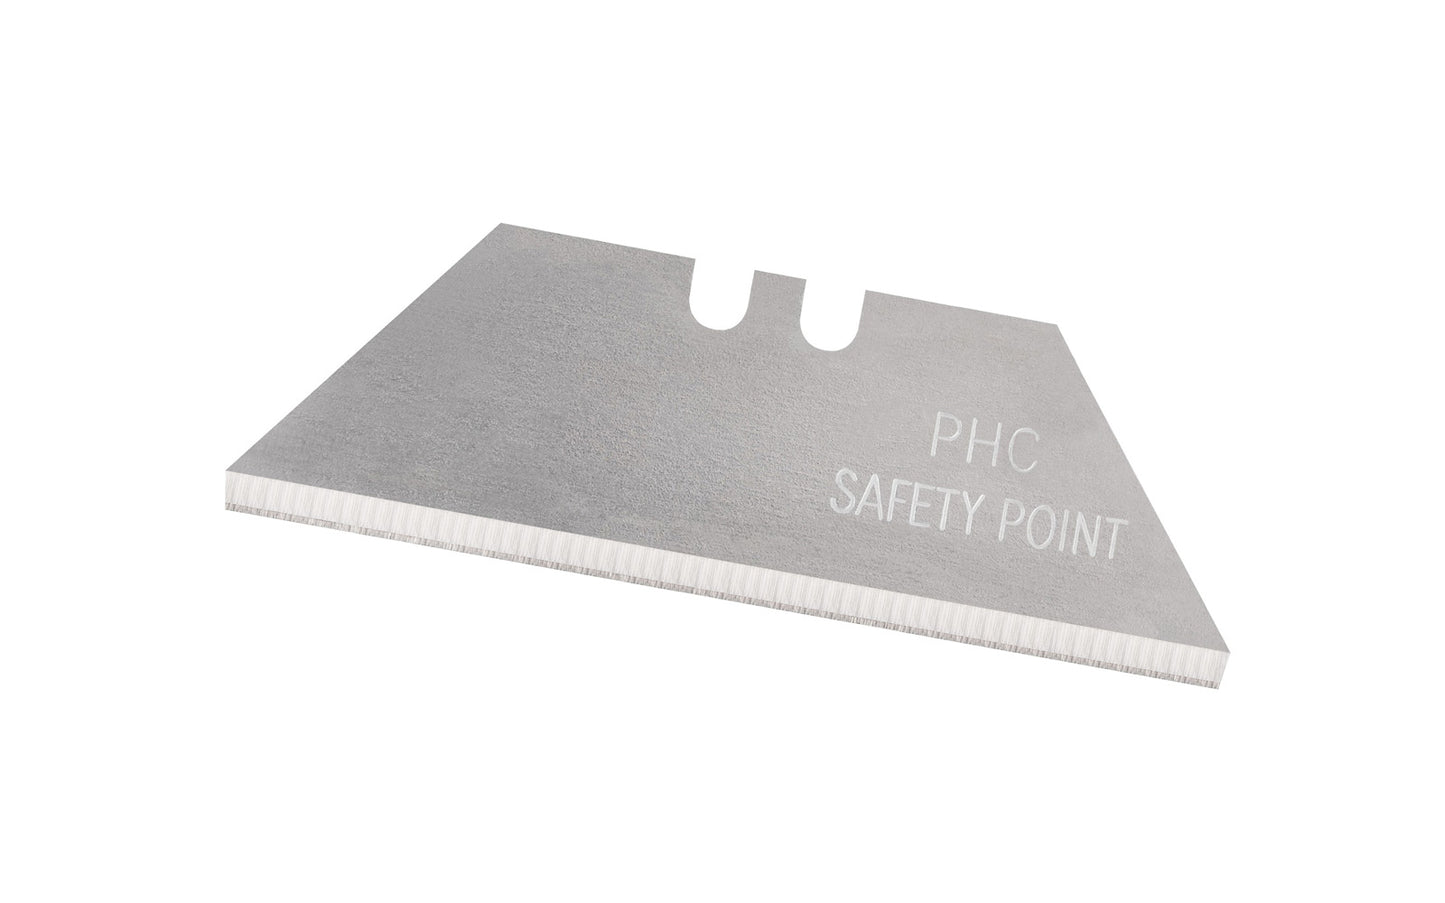 These Standard Utility Blades have a special safety point. They are made of high quality carbon steel & hold a sharp edge. 0.25" thickness of blade. Universal two-notch design & fits most standard utility knives. 5 Pack. PHC - Pacific Handy Cutter.  Made in USA. 073441001172